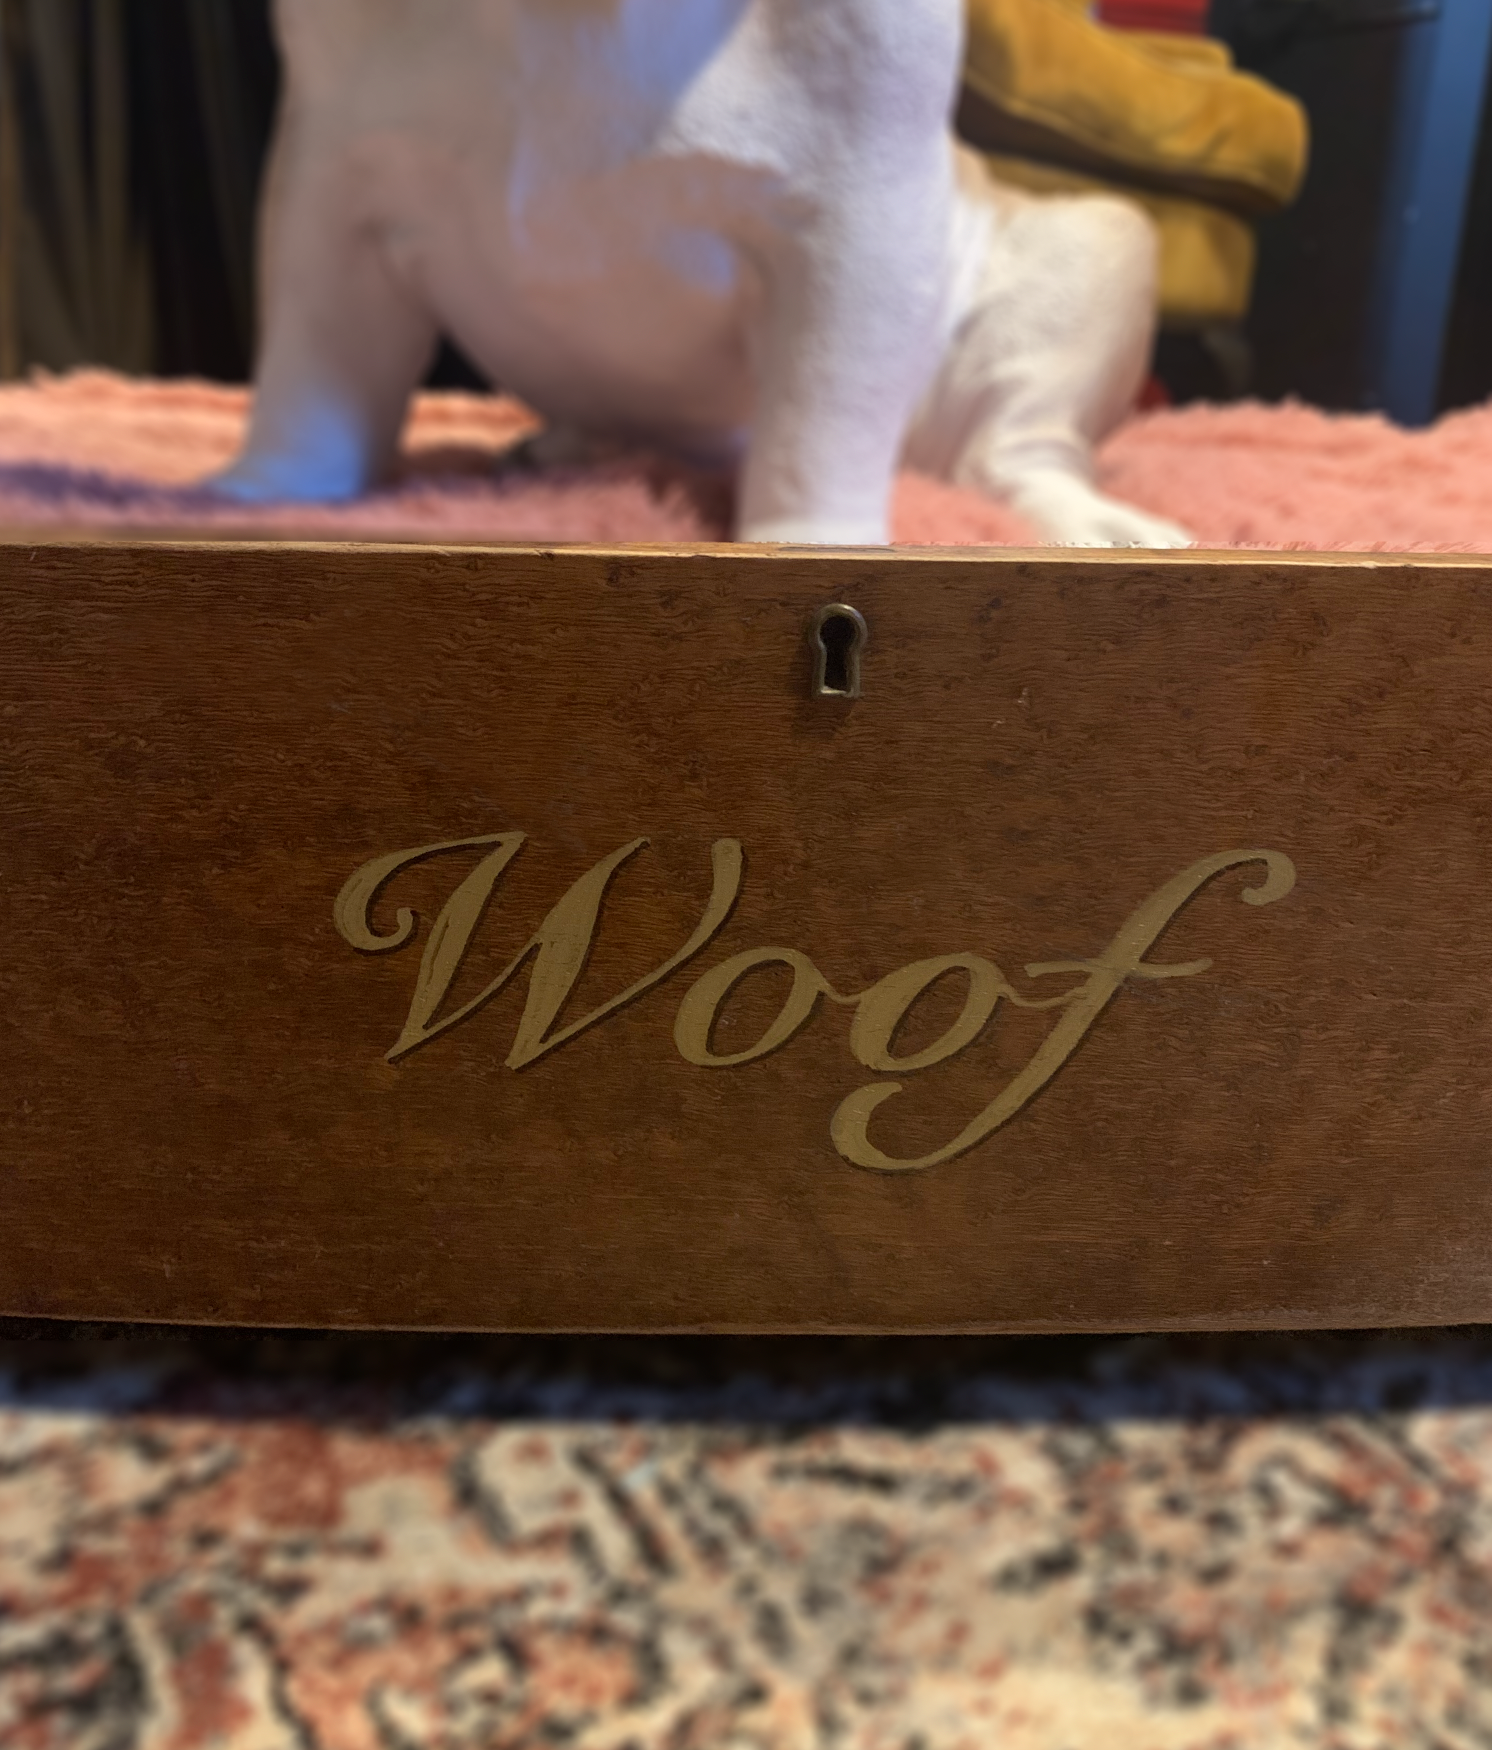 "Woof" Dog Bed